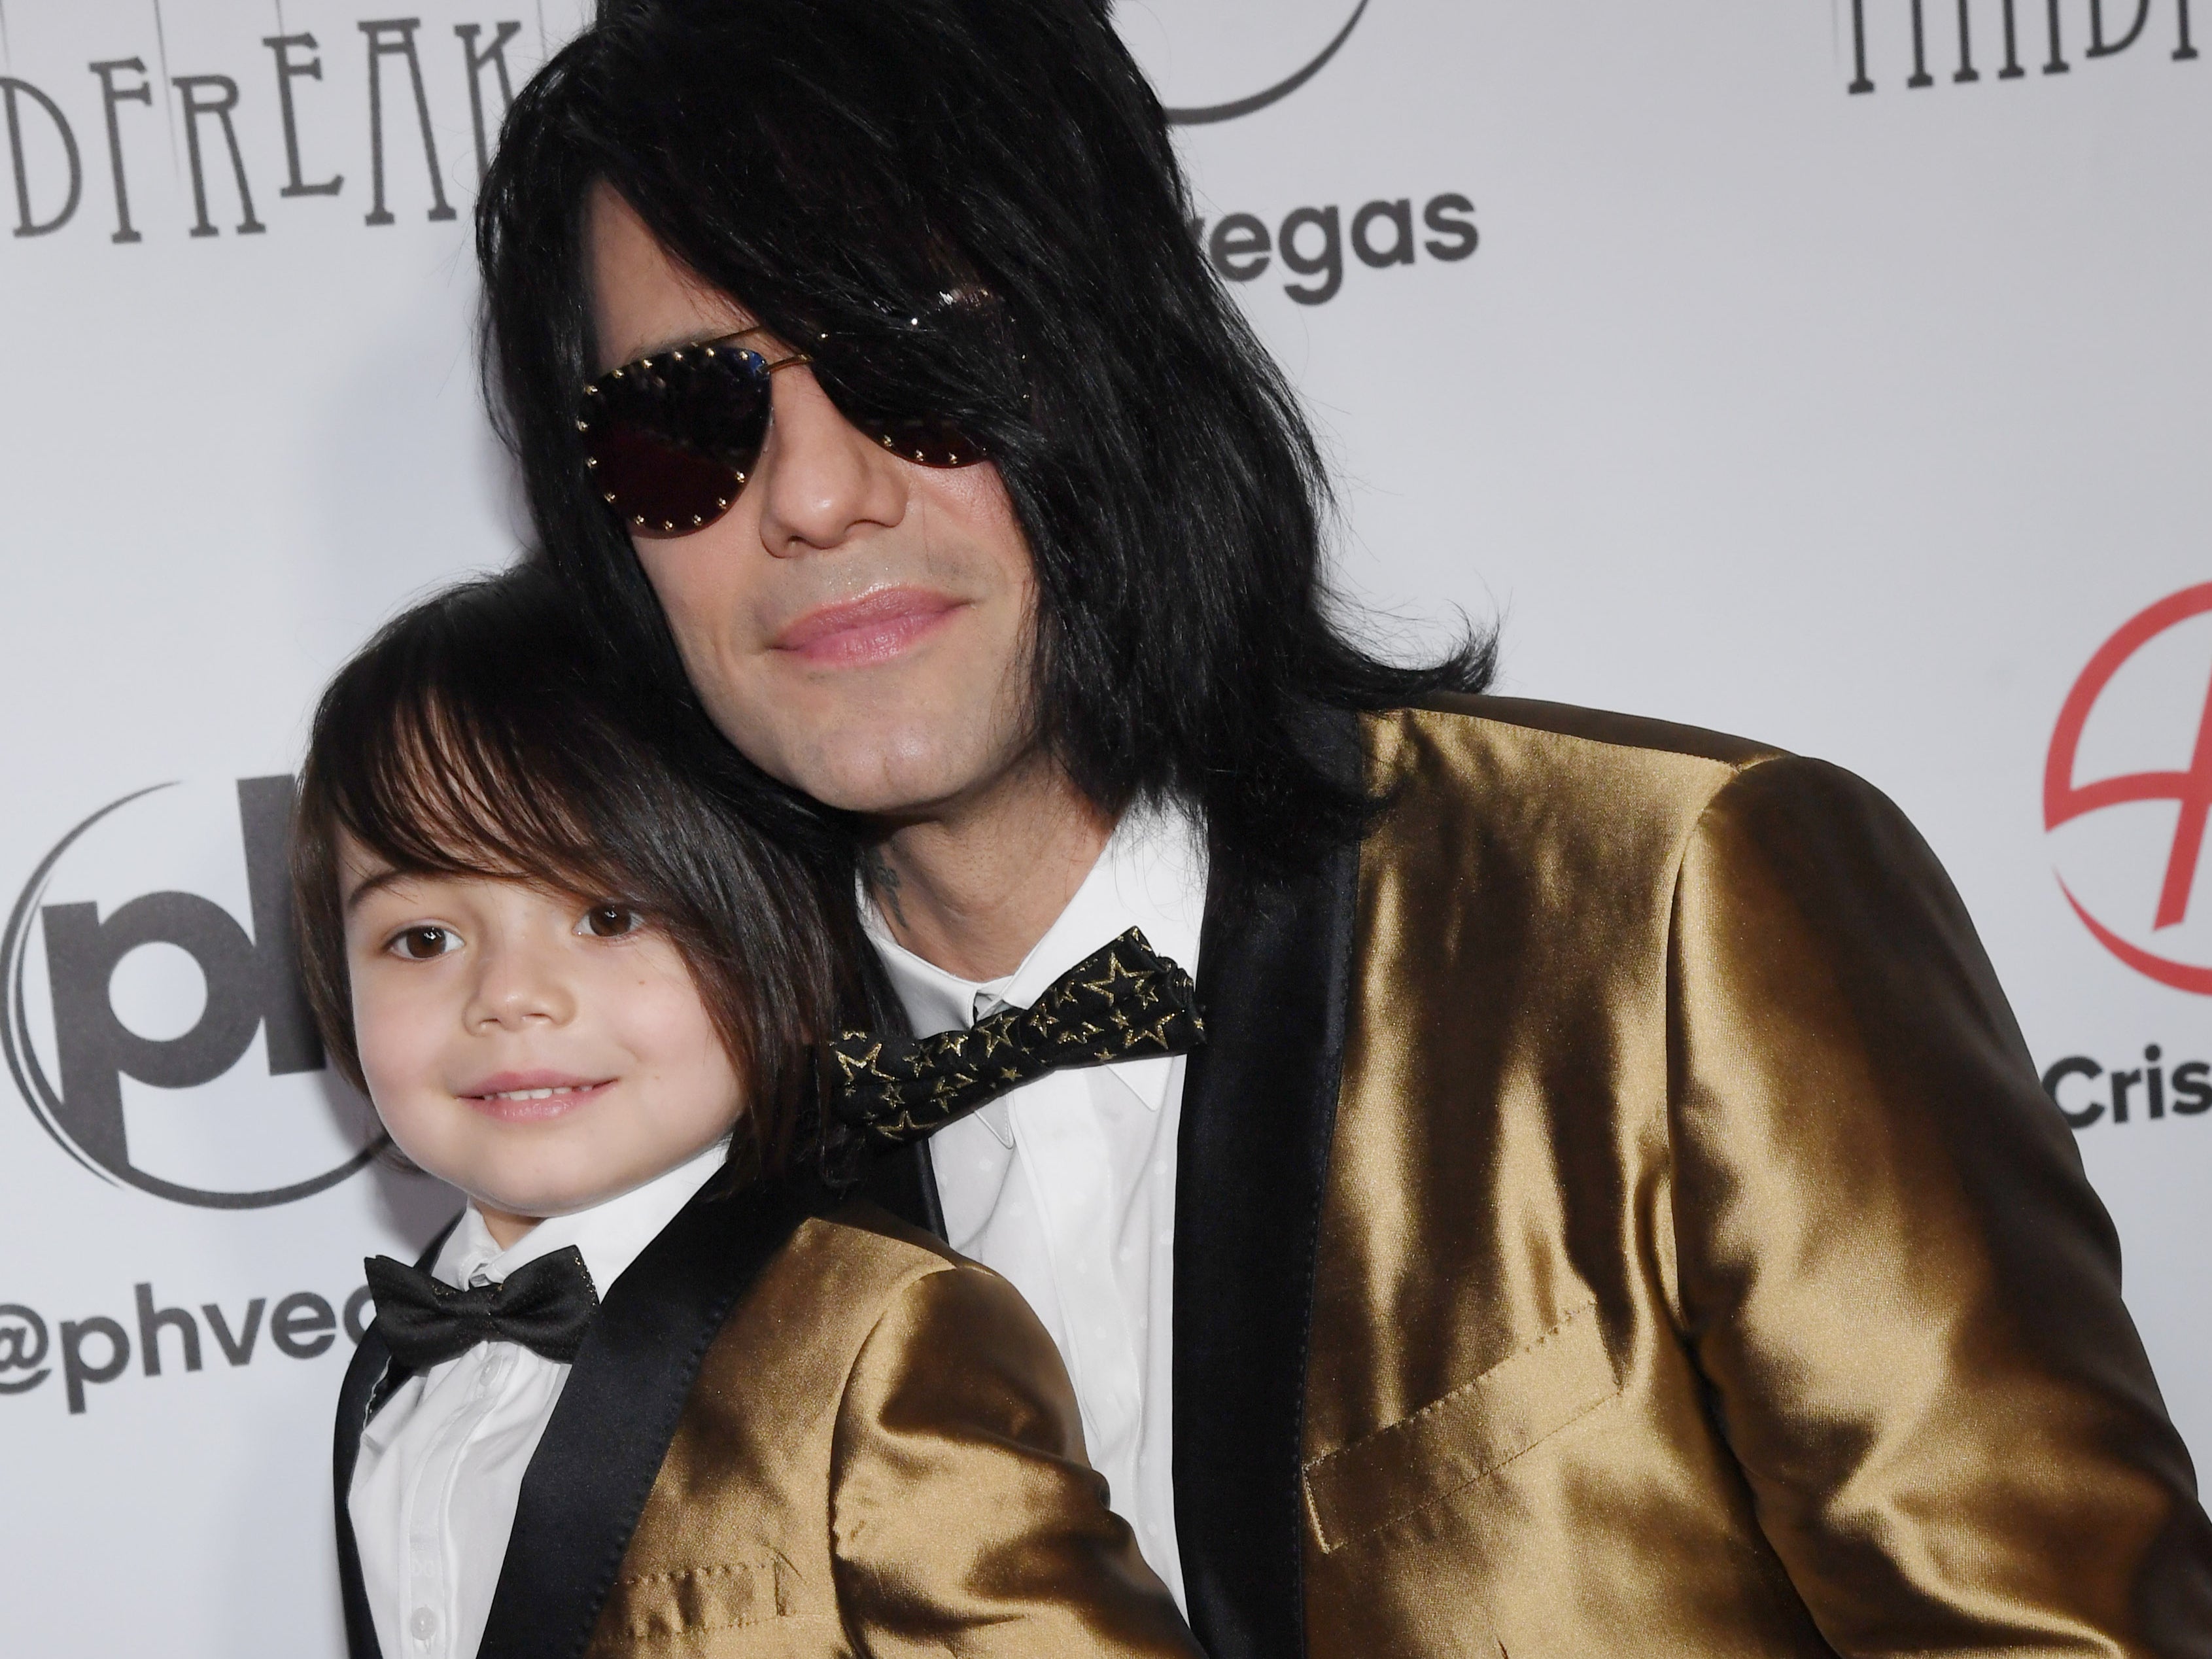 Criss Angel and his son Johnny Crisstopher at the opening of one of Angel’s shows in Las Vegas, Nevada, on 19 January 2019